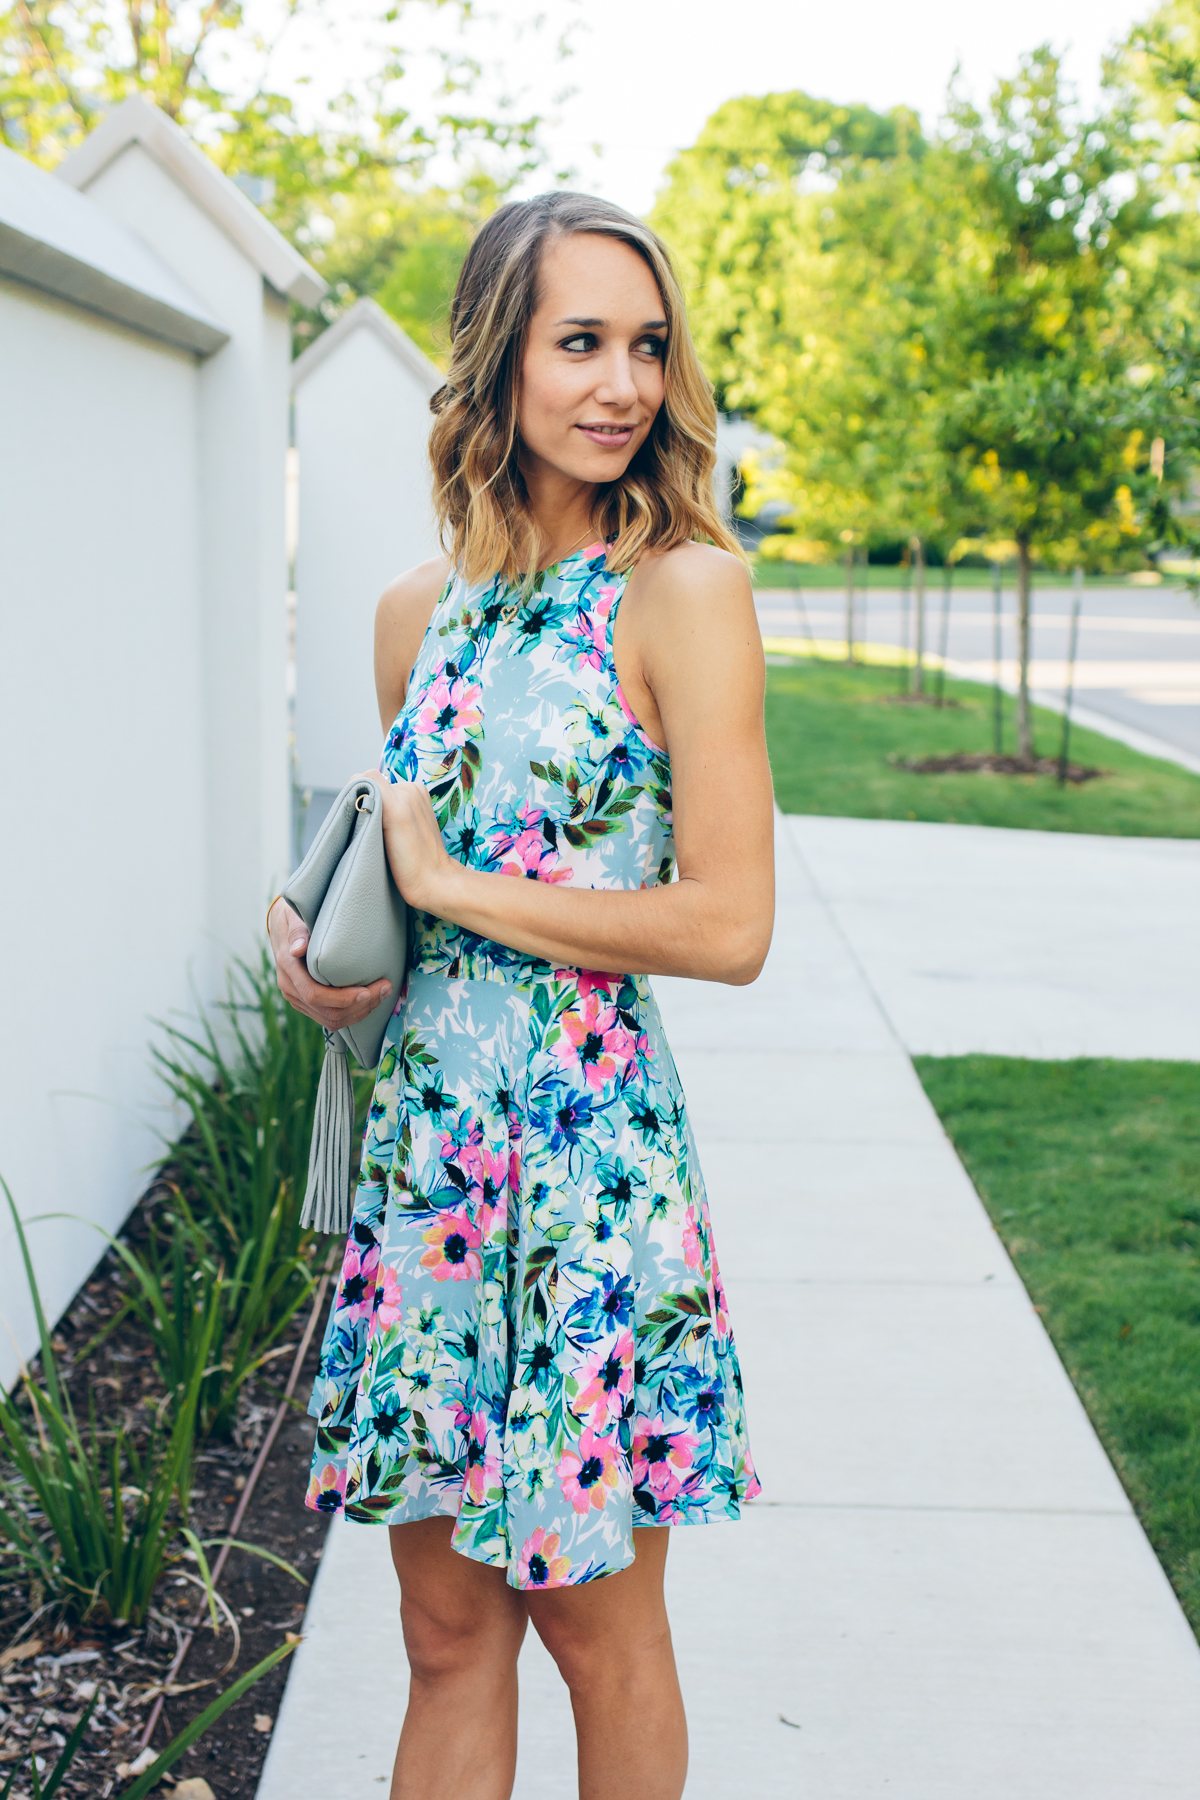 What to Wear to an Engagement Party